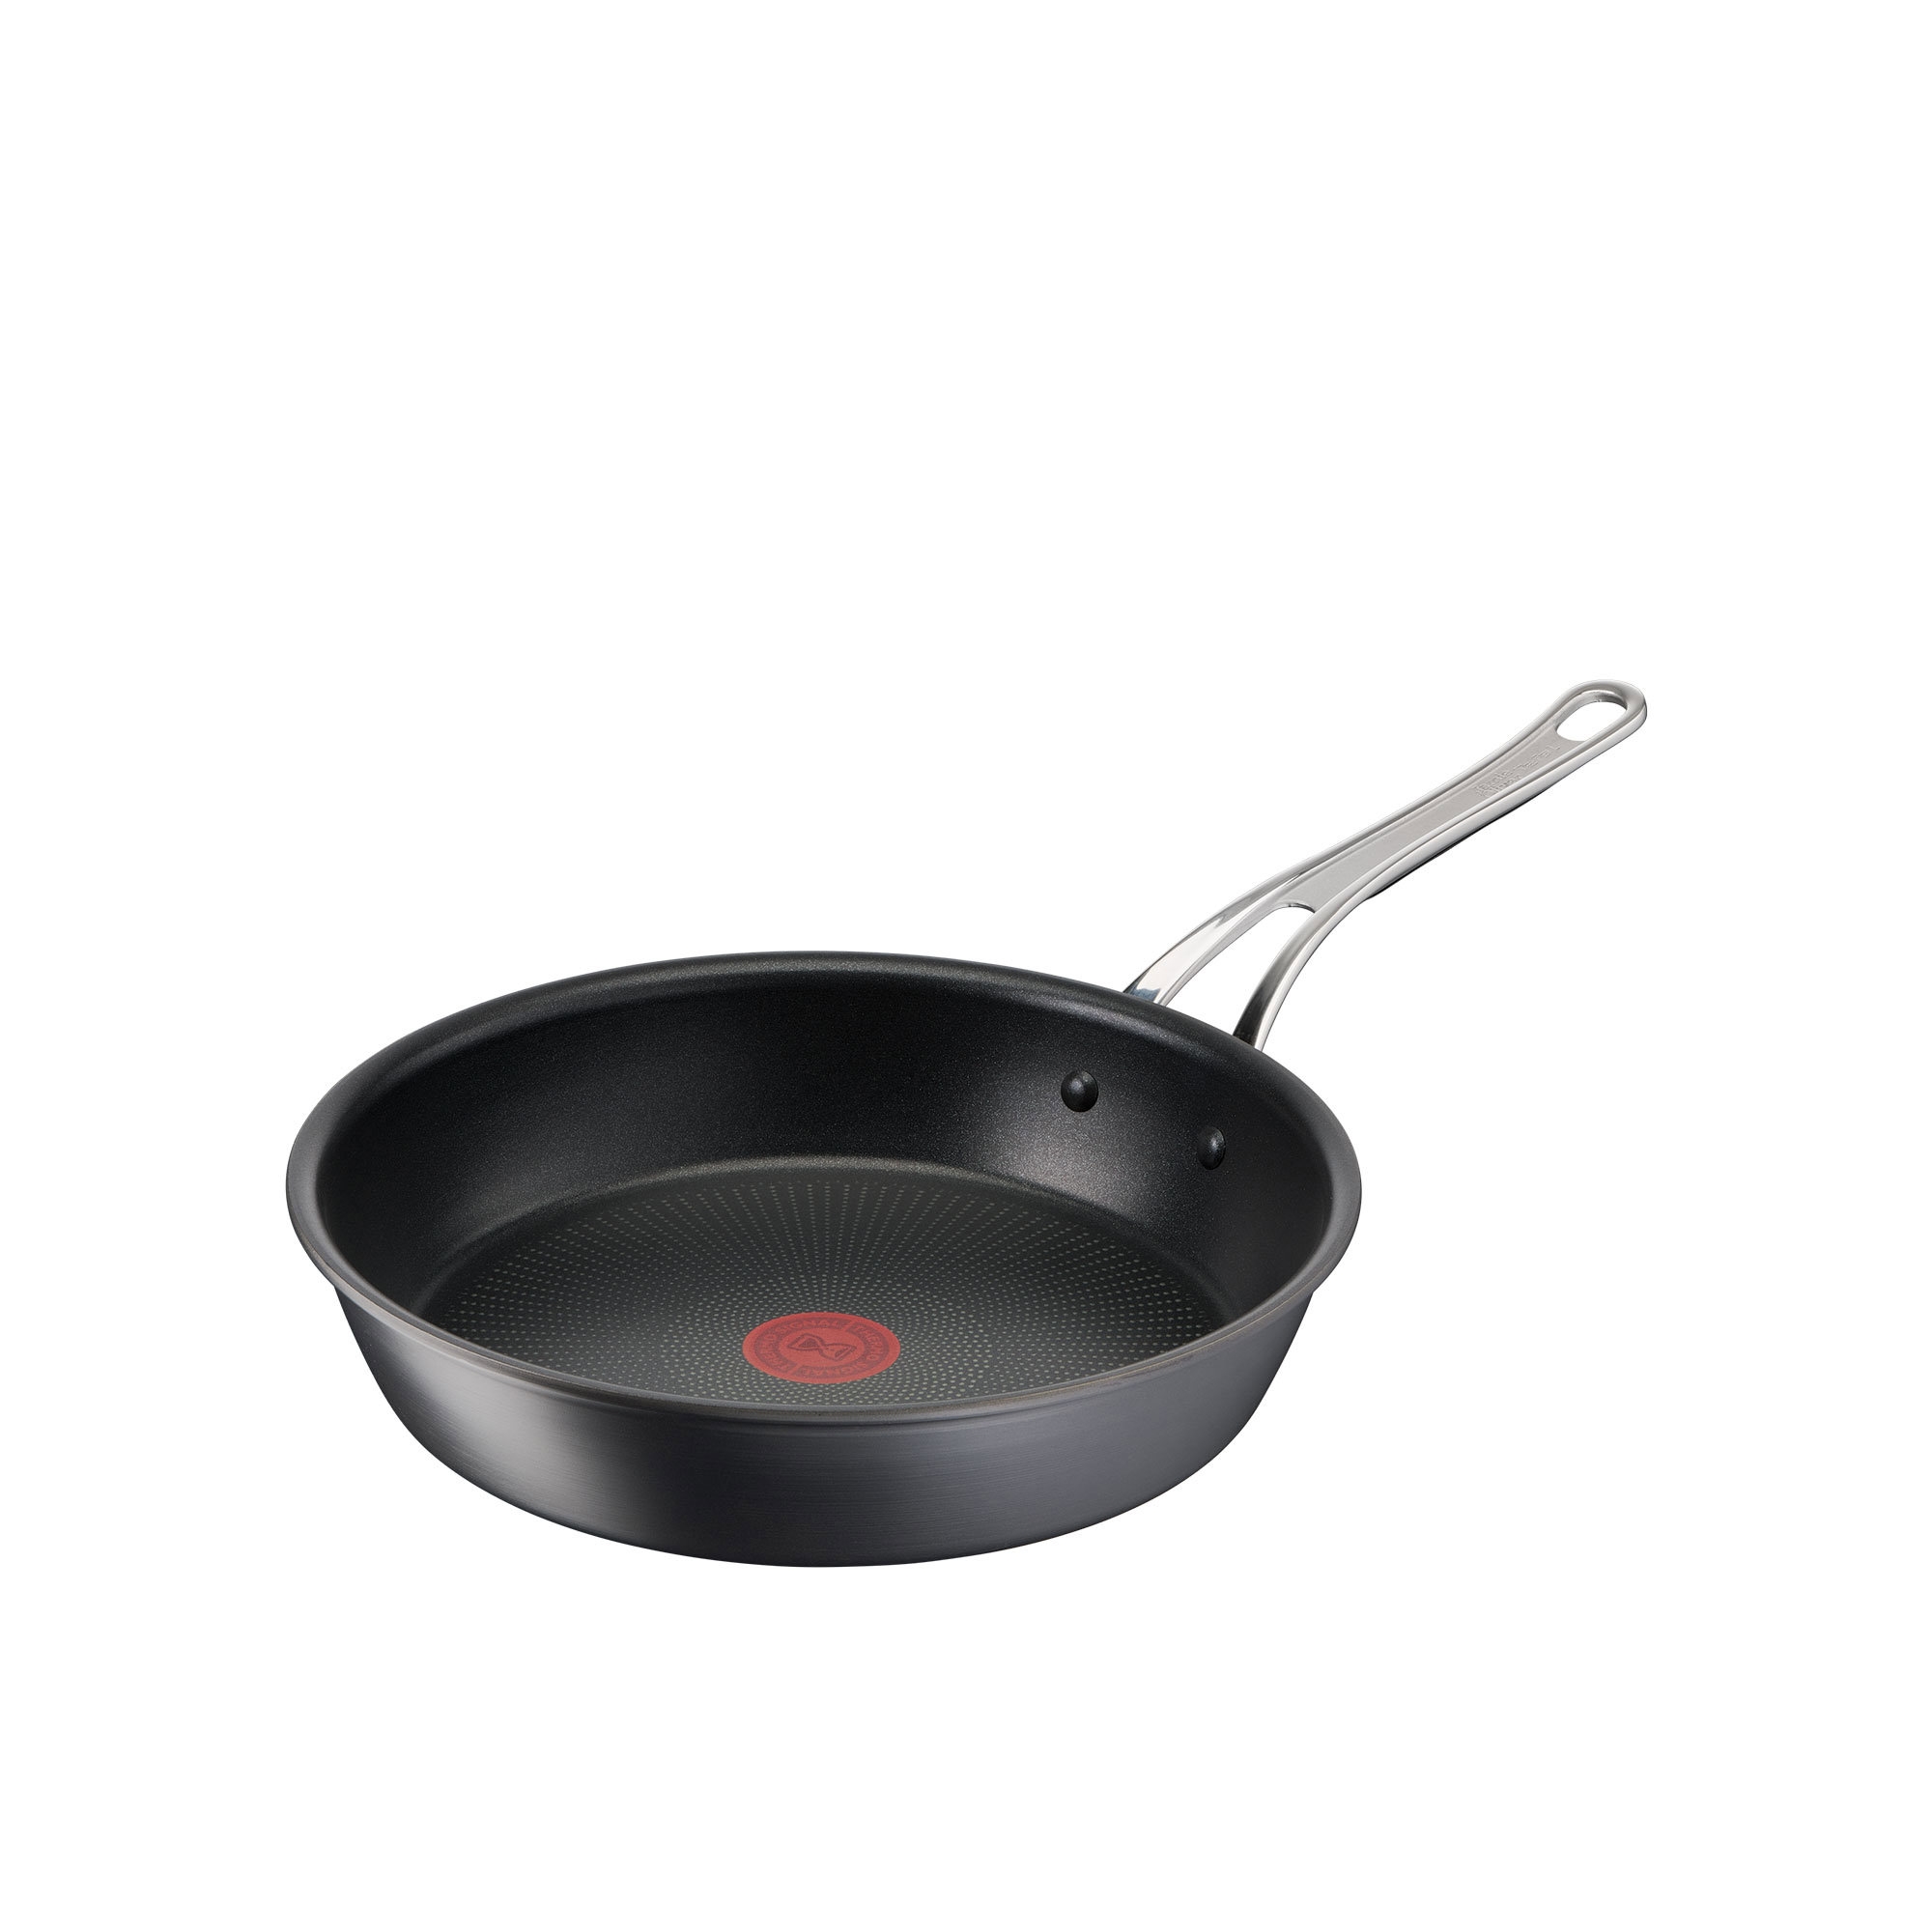 Jamie Oliver by Tefal Cook's Classic Hard Anodised Induction Frypan 24cm Image 1